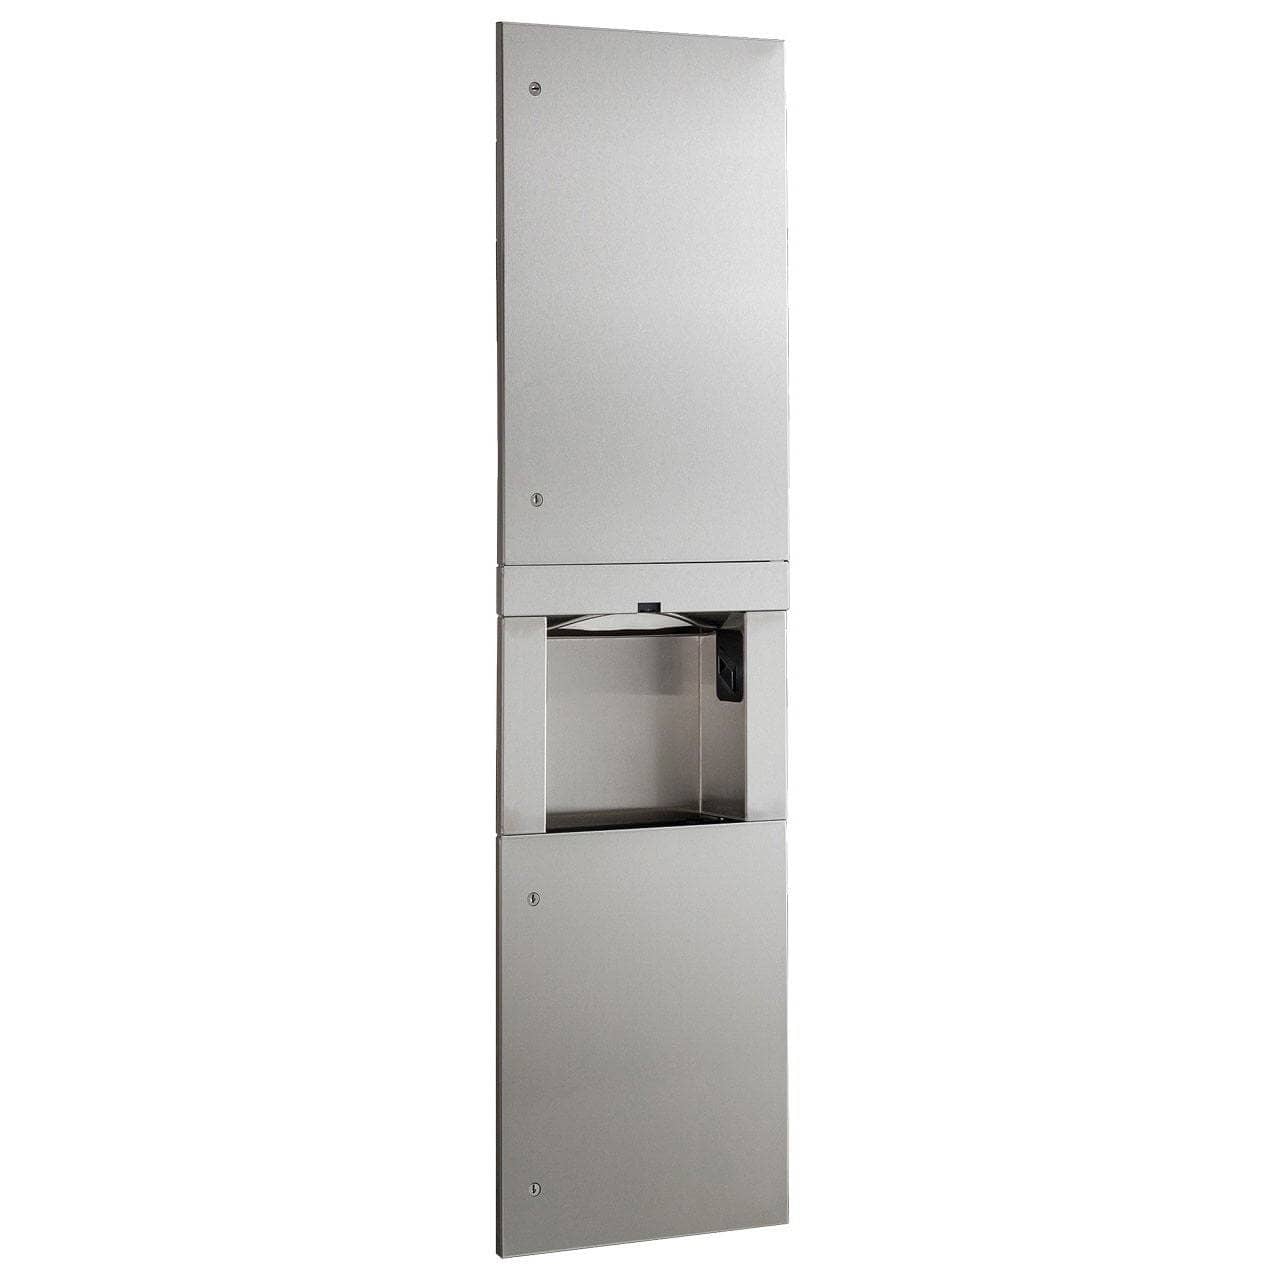 Bobrick B-38030 Automatic Commercial Paper Towel Dispenser/Hand Dryer/Waste Receptacle, Recessed-Mounted, Stainless Steel - TotalRestroom.com